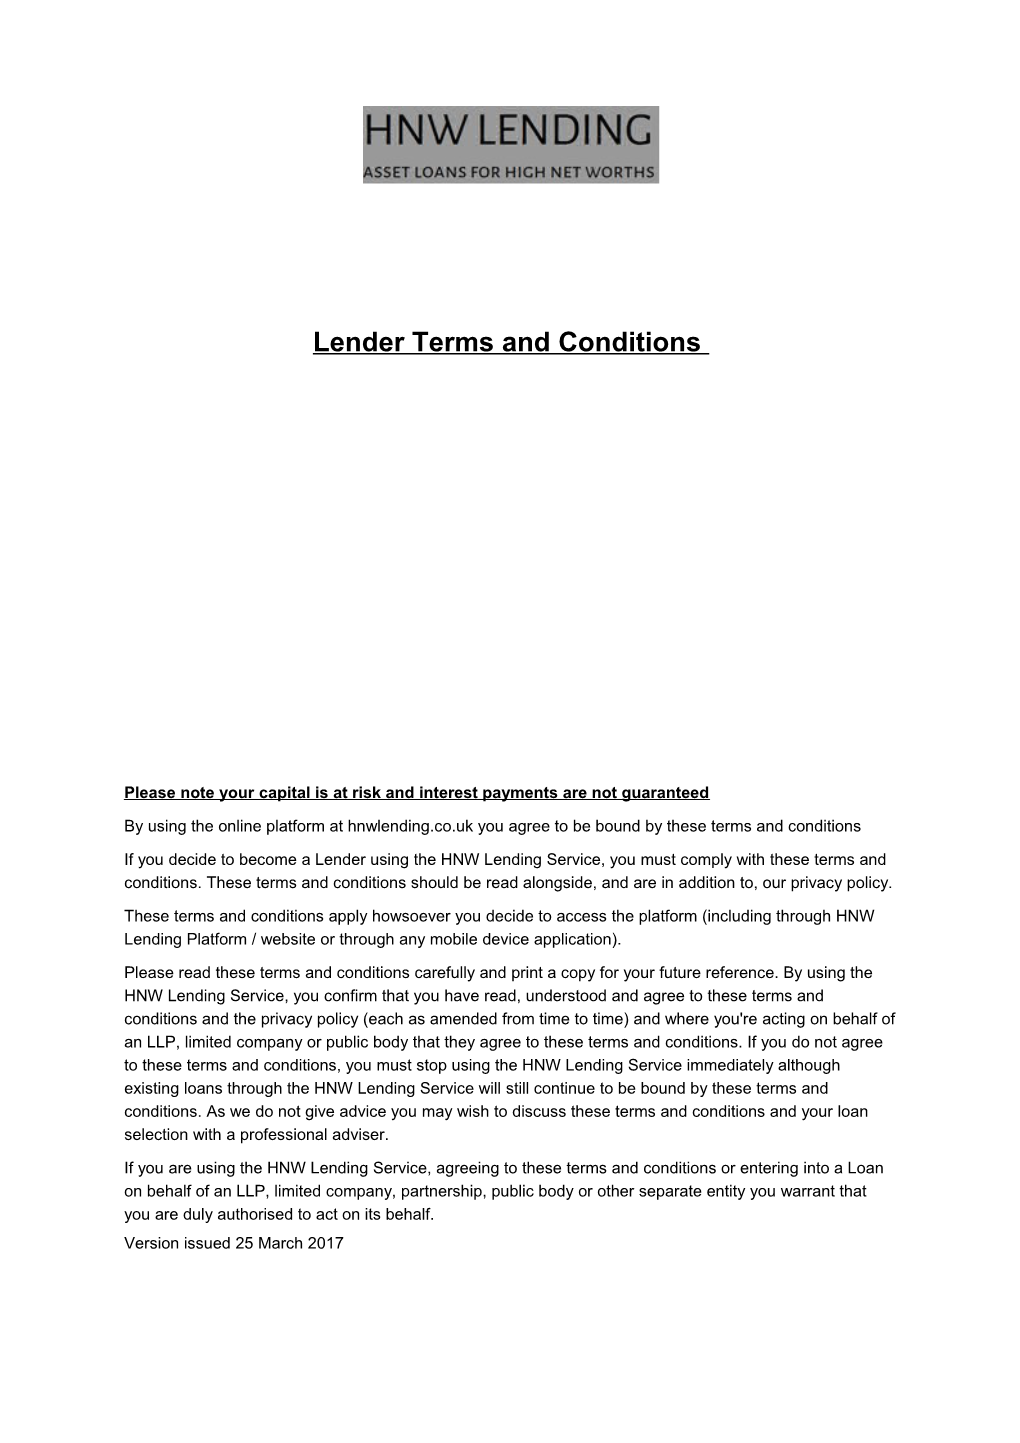 Lender Terms and Conditions